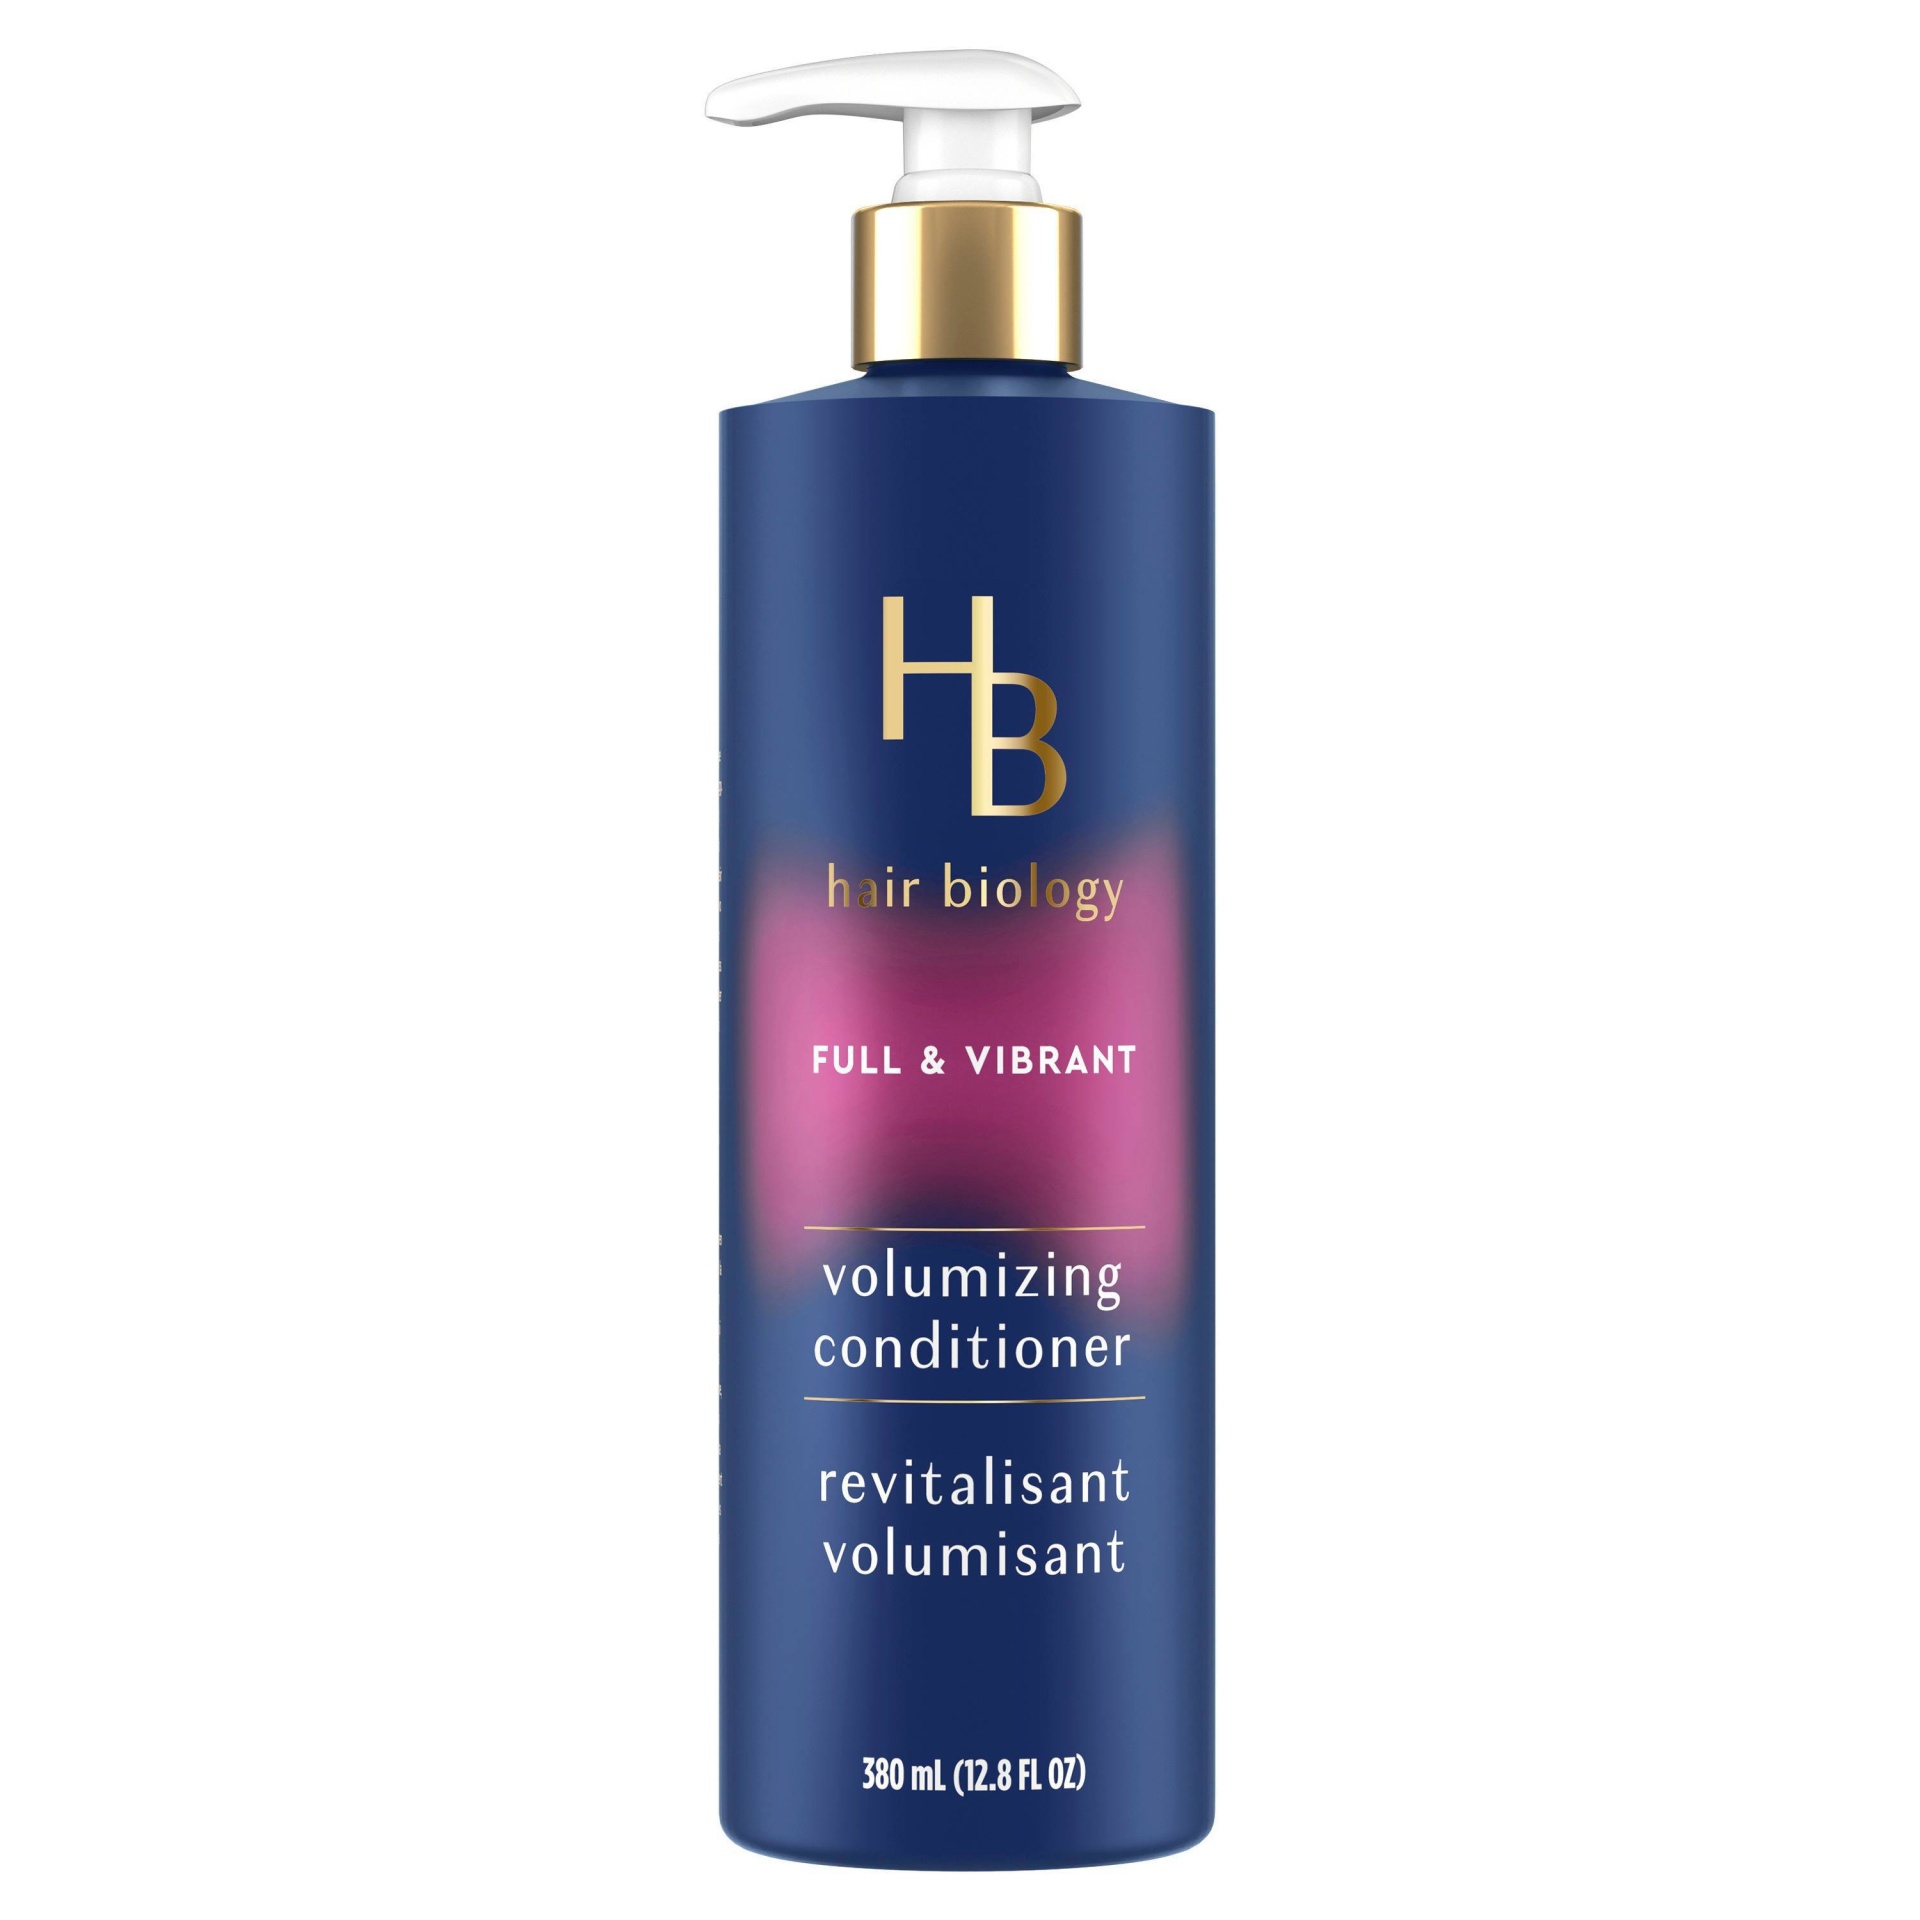 slide 1 of 8, Hair Biology Biotin Volumizing Conditioner for Thinning, Flat and Fine Thin Hair Fights Breakage and Replenishes Nutrients - 12.8 fl oz, 12.8 fl oz